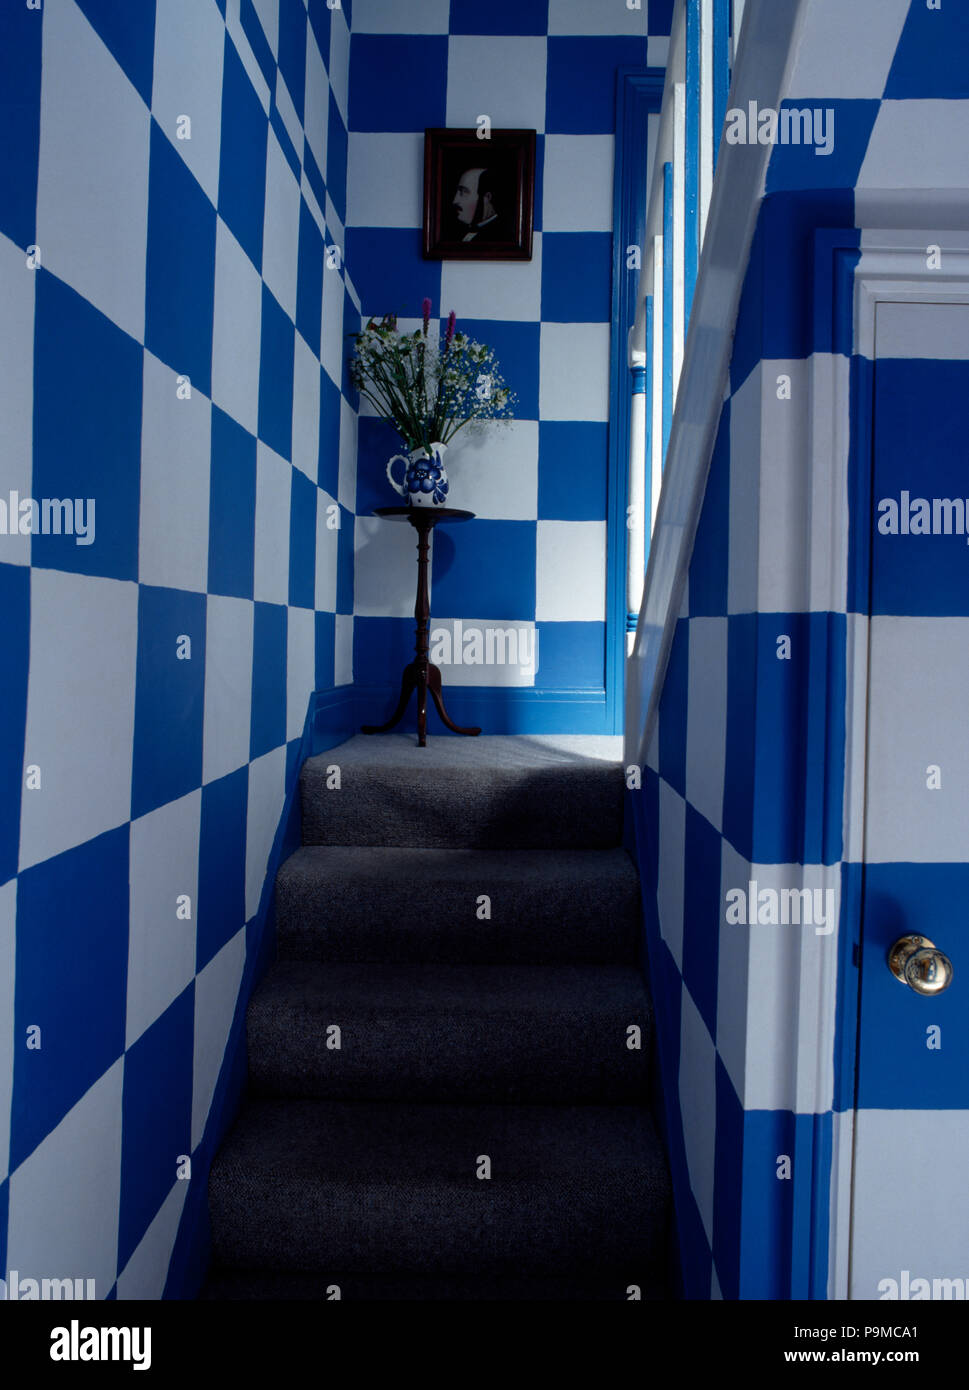 Grey carpet on stairs with walls painted in large blue+white checks Stock Photo